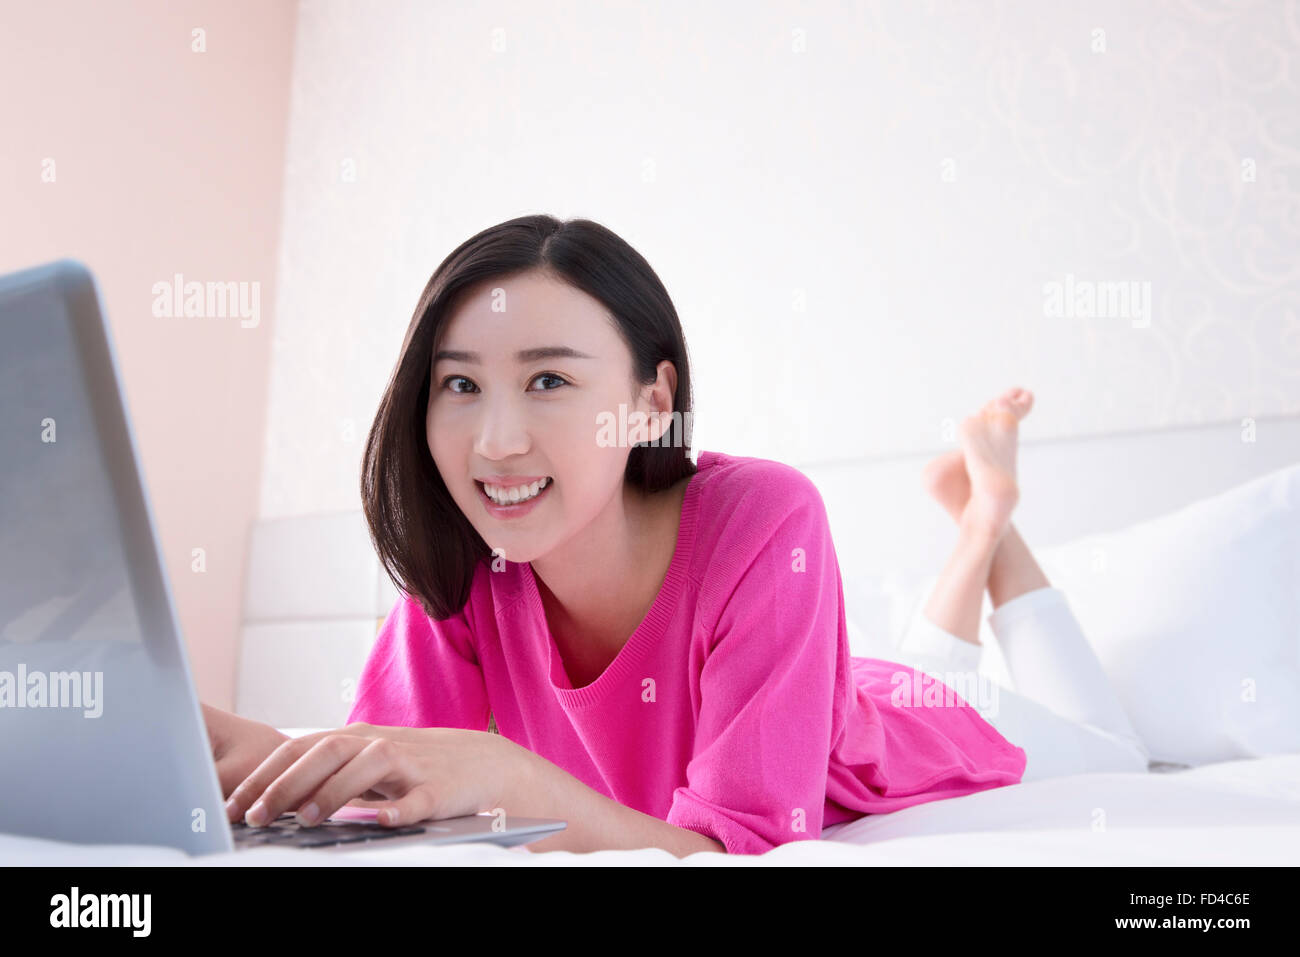 Young woman using laptop in bed Banque D'Images